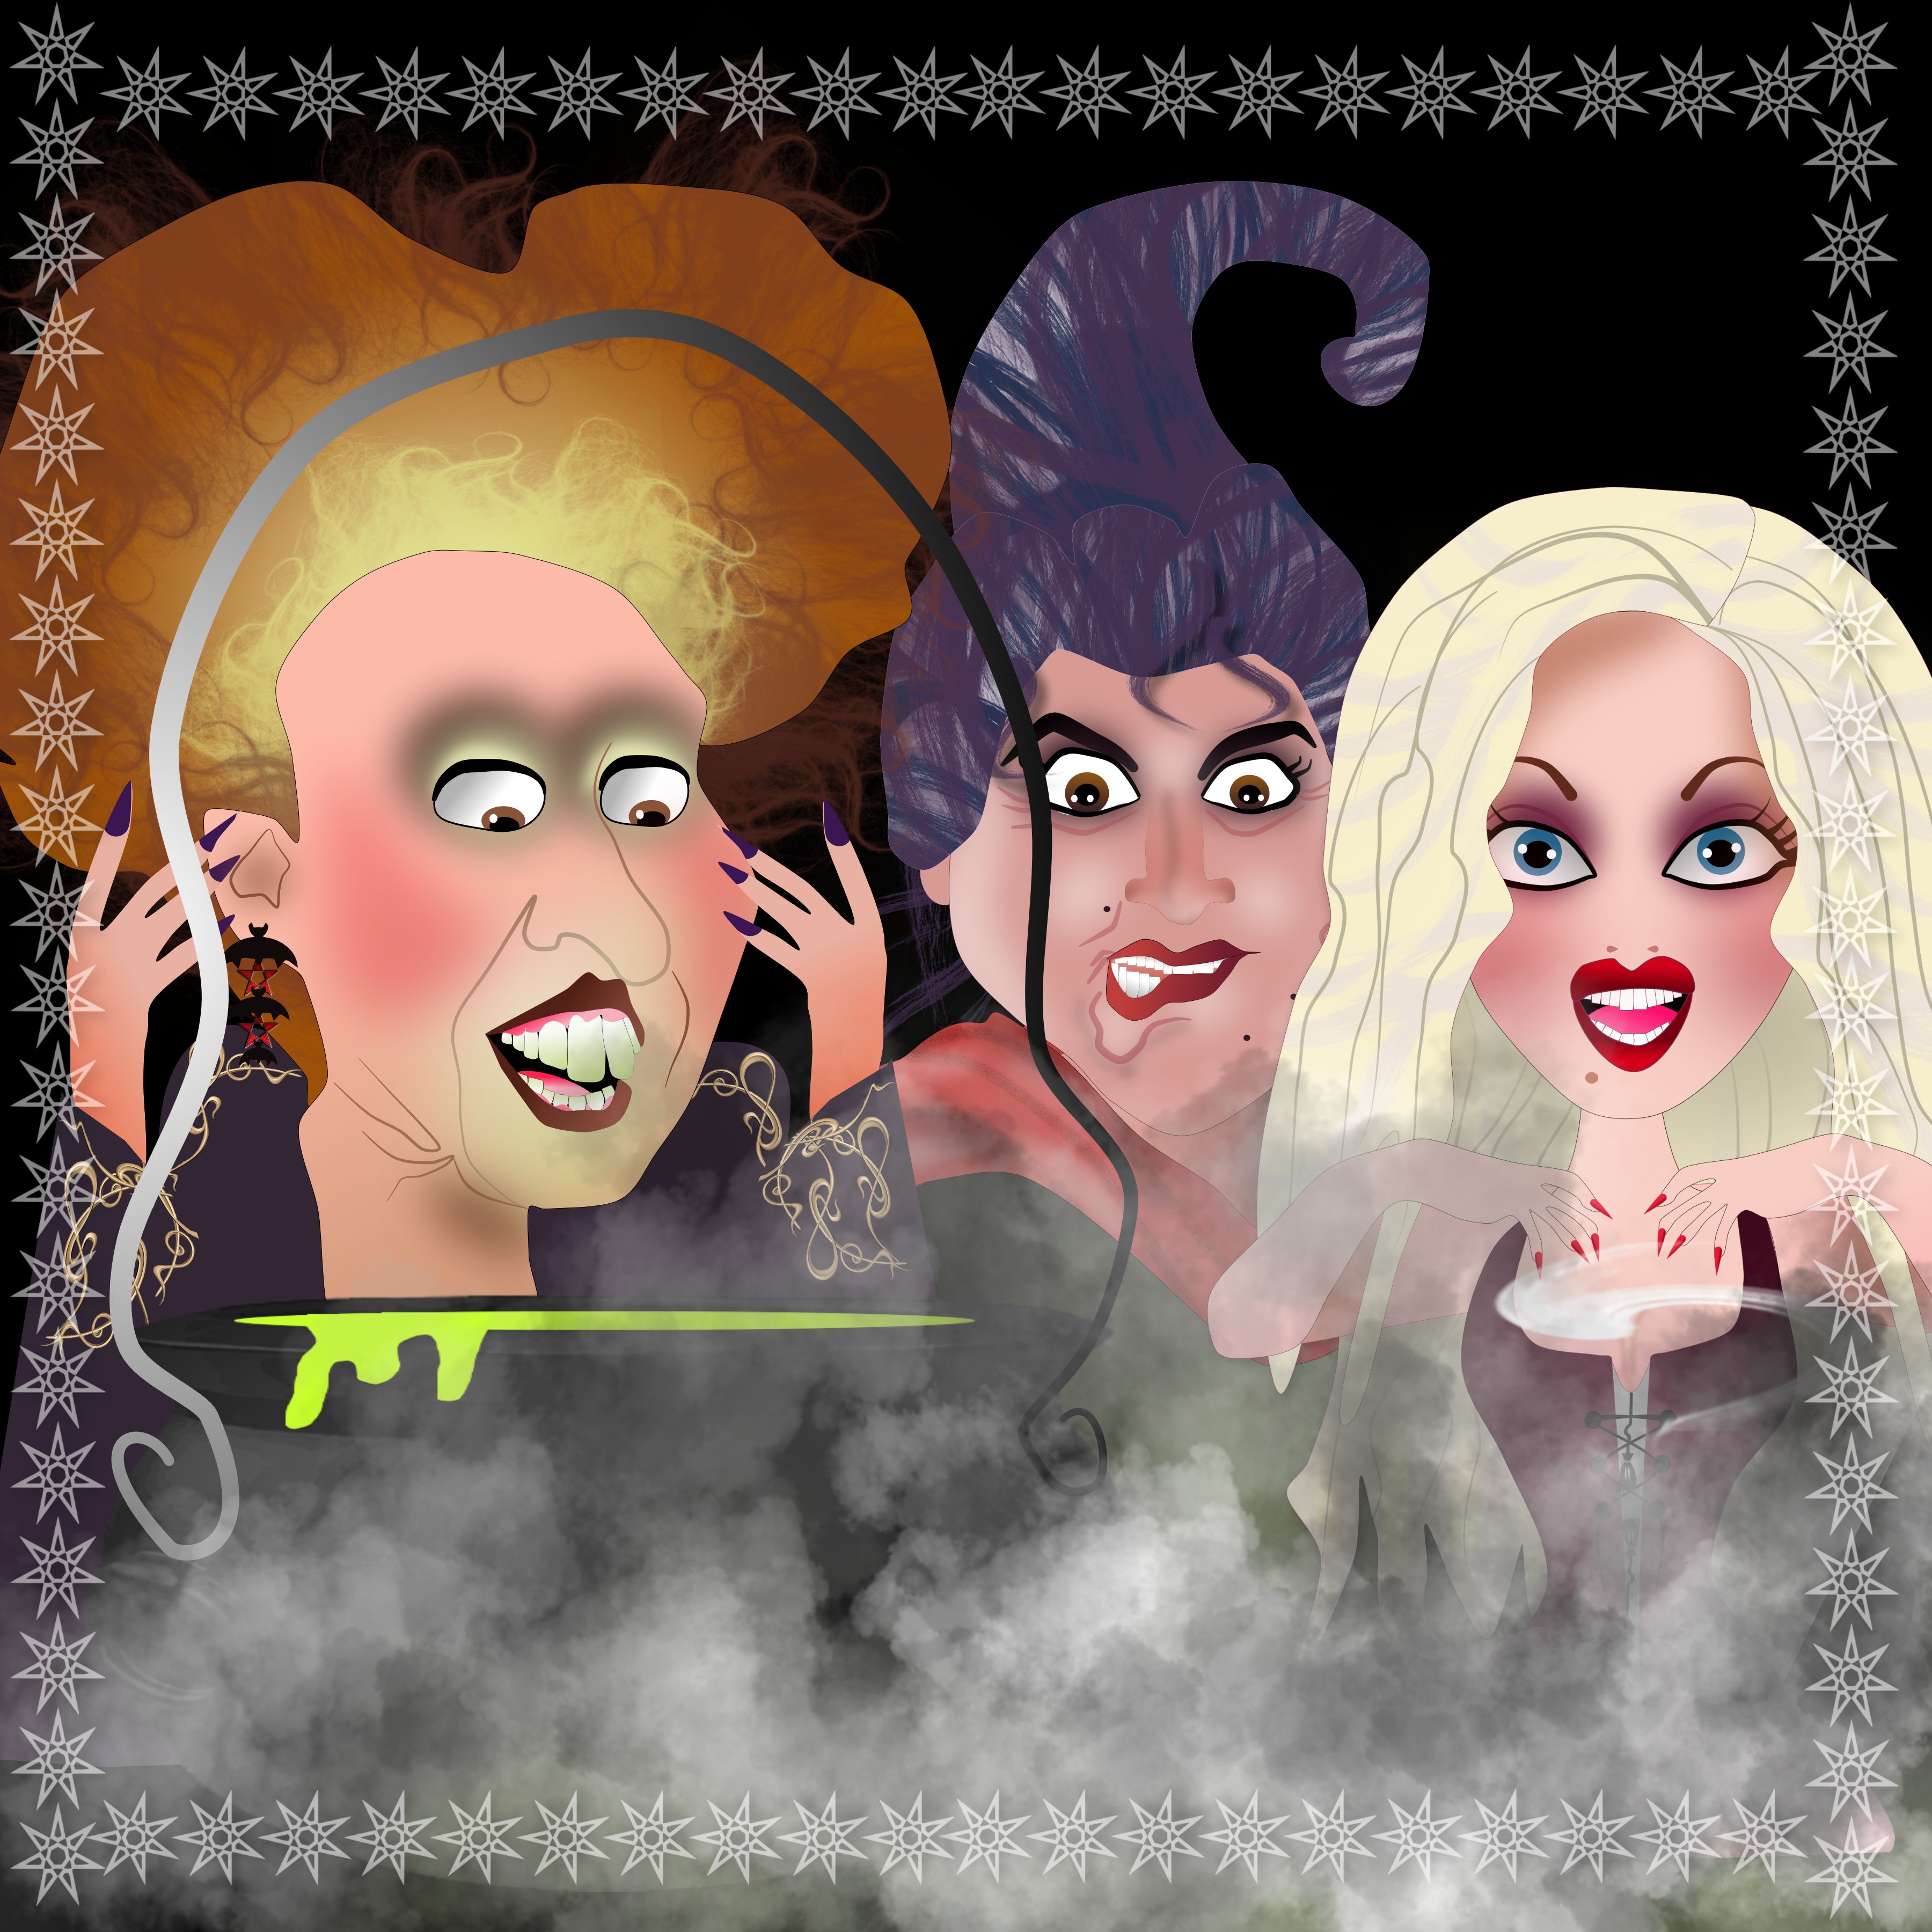 Sanderson sisters Hocus pocus - Share your work - Affinity